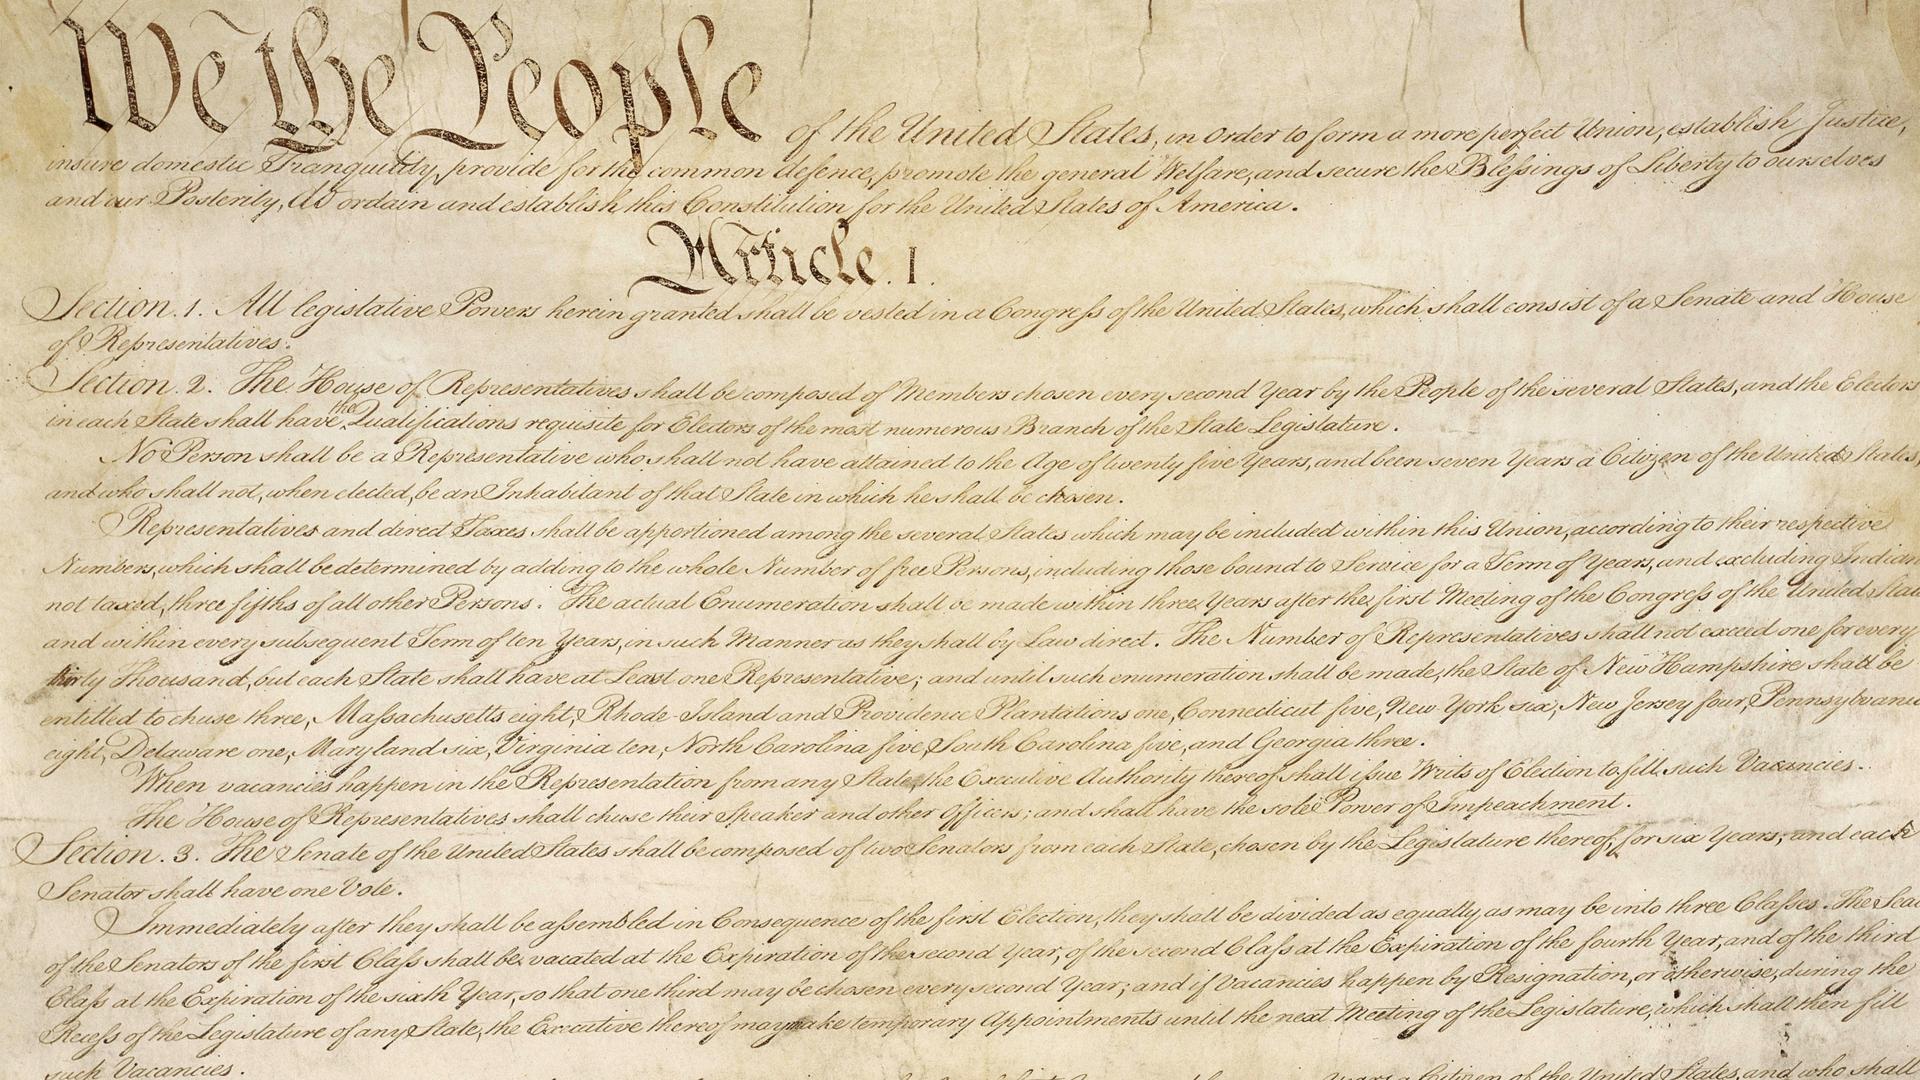 The US Constitution's first page